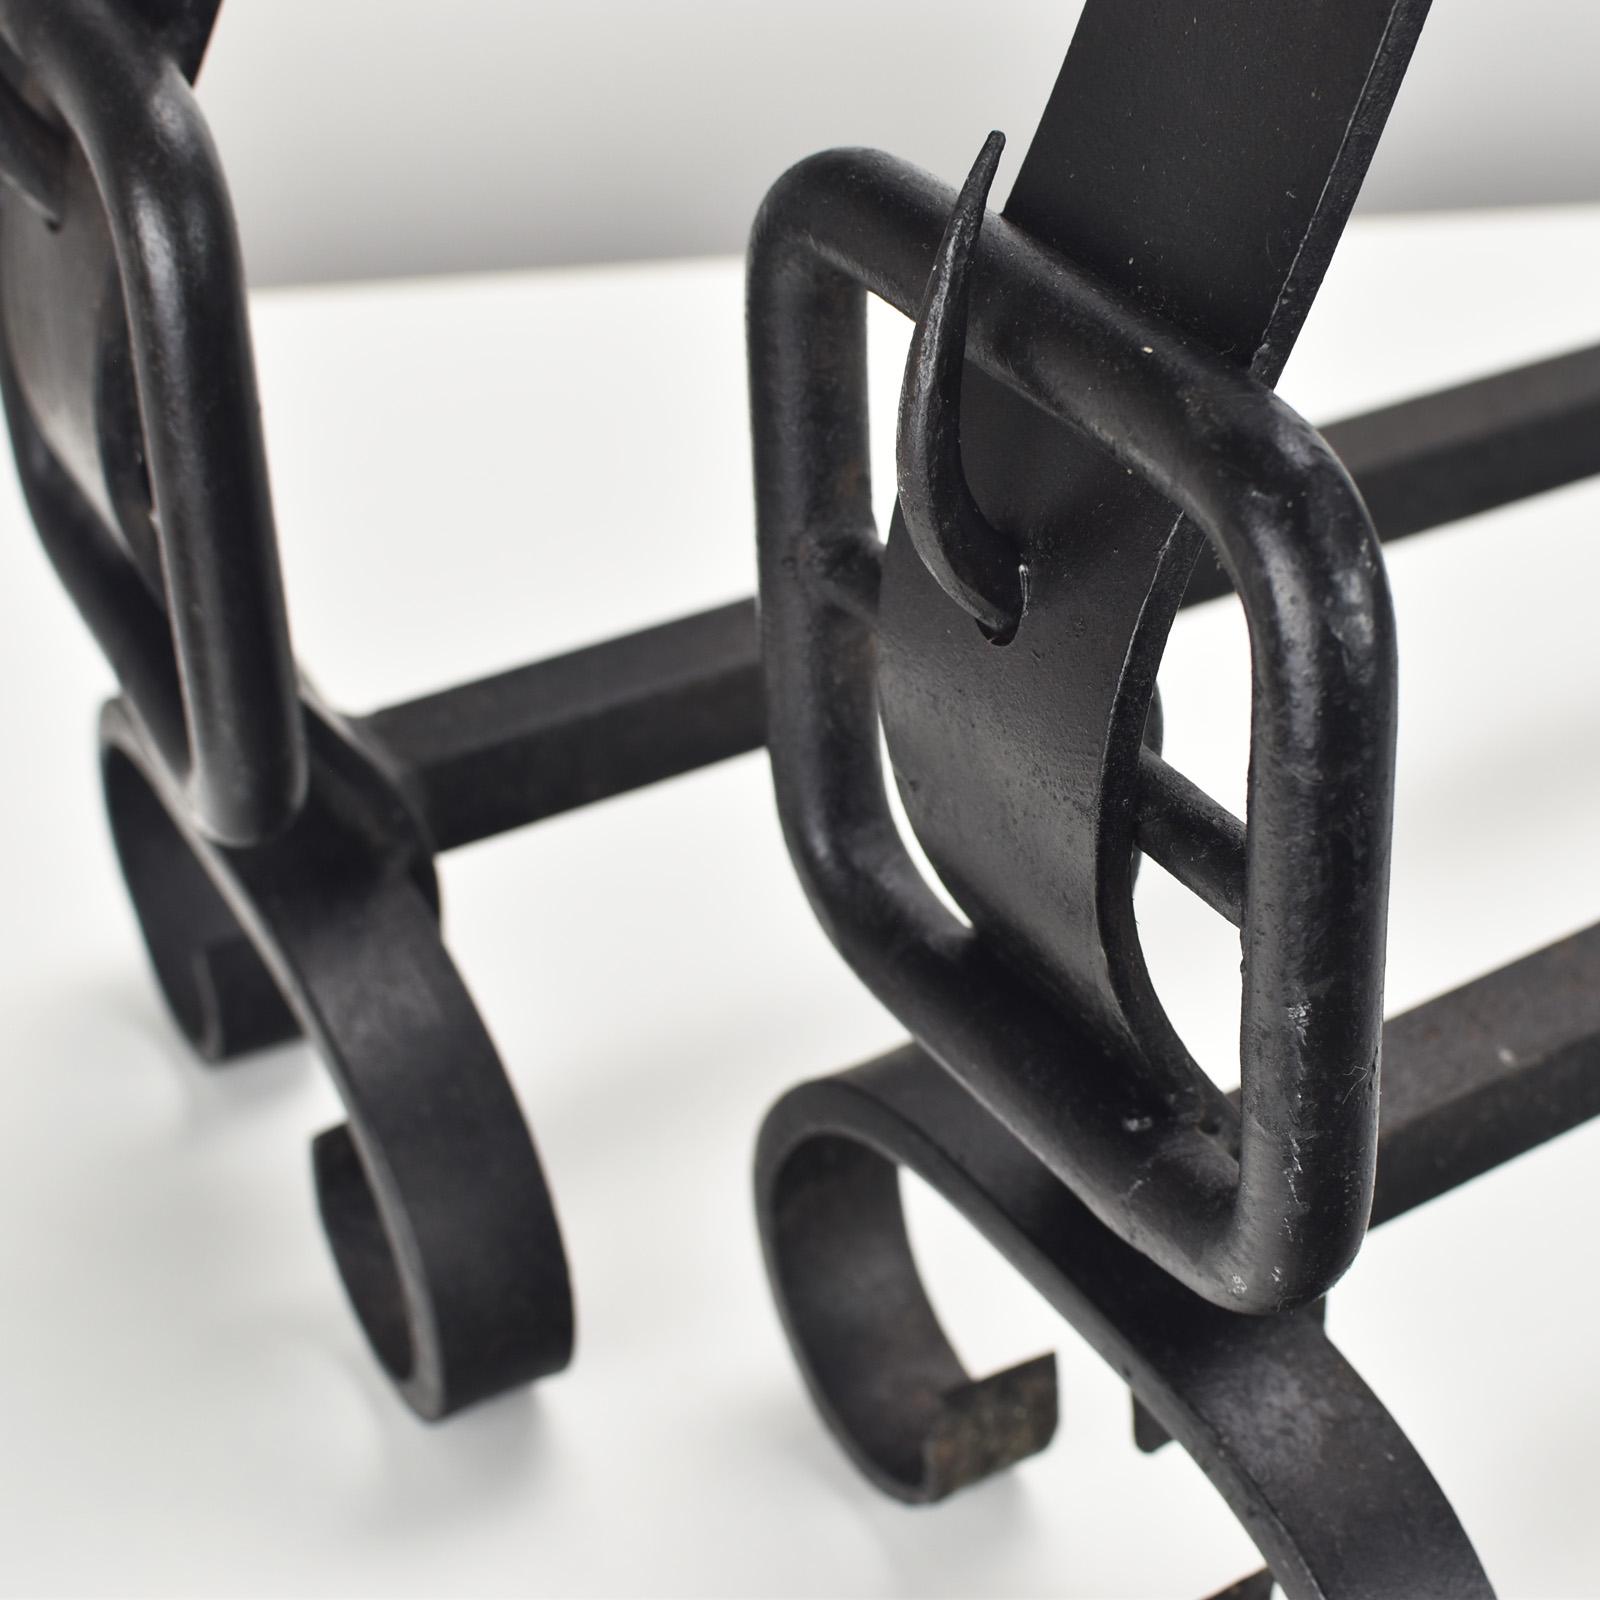 French Pair of Wrought Iron Andirons Firedogs France ca. 1950s Jacques Adnet Style For Sale